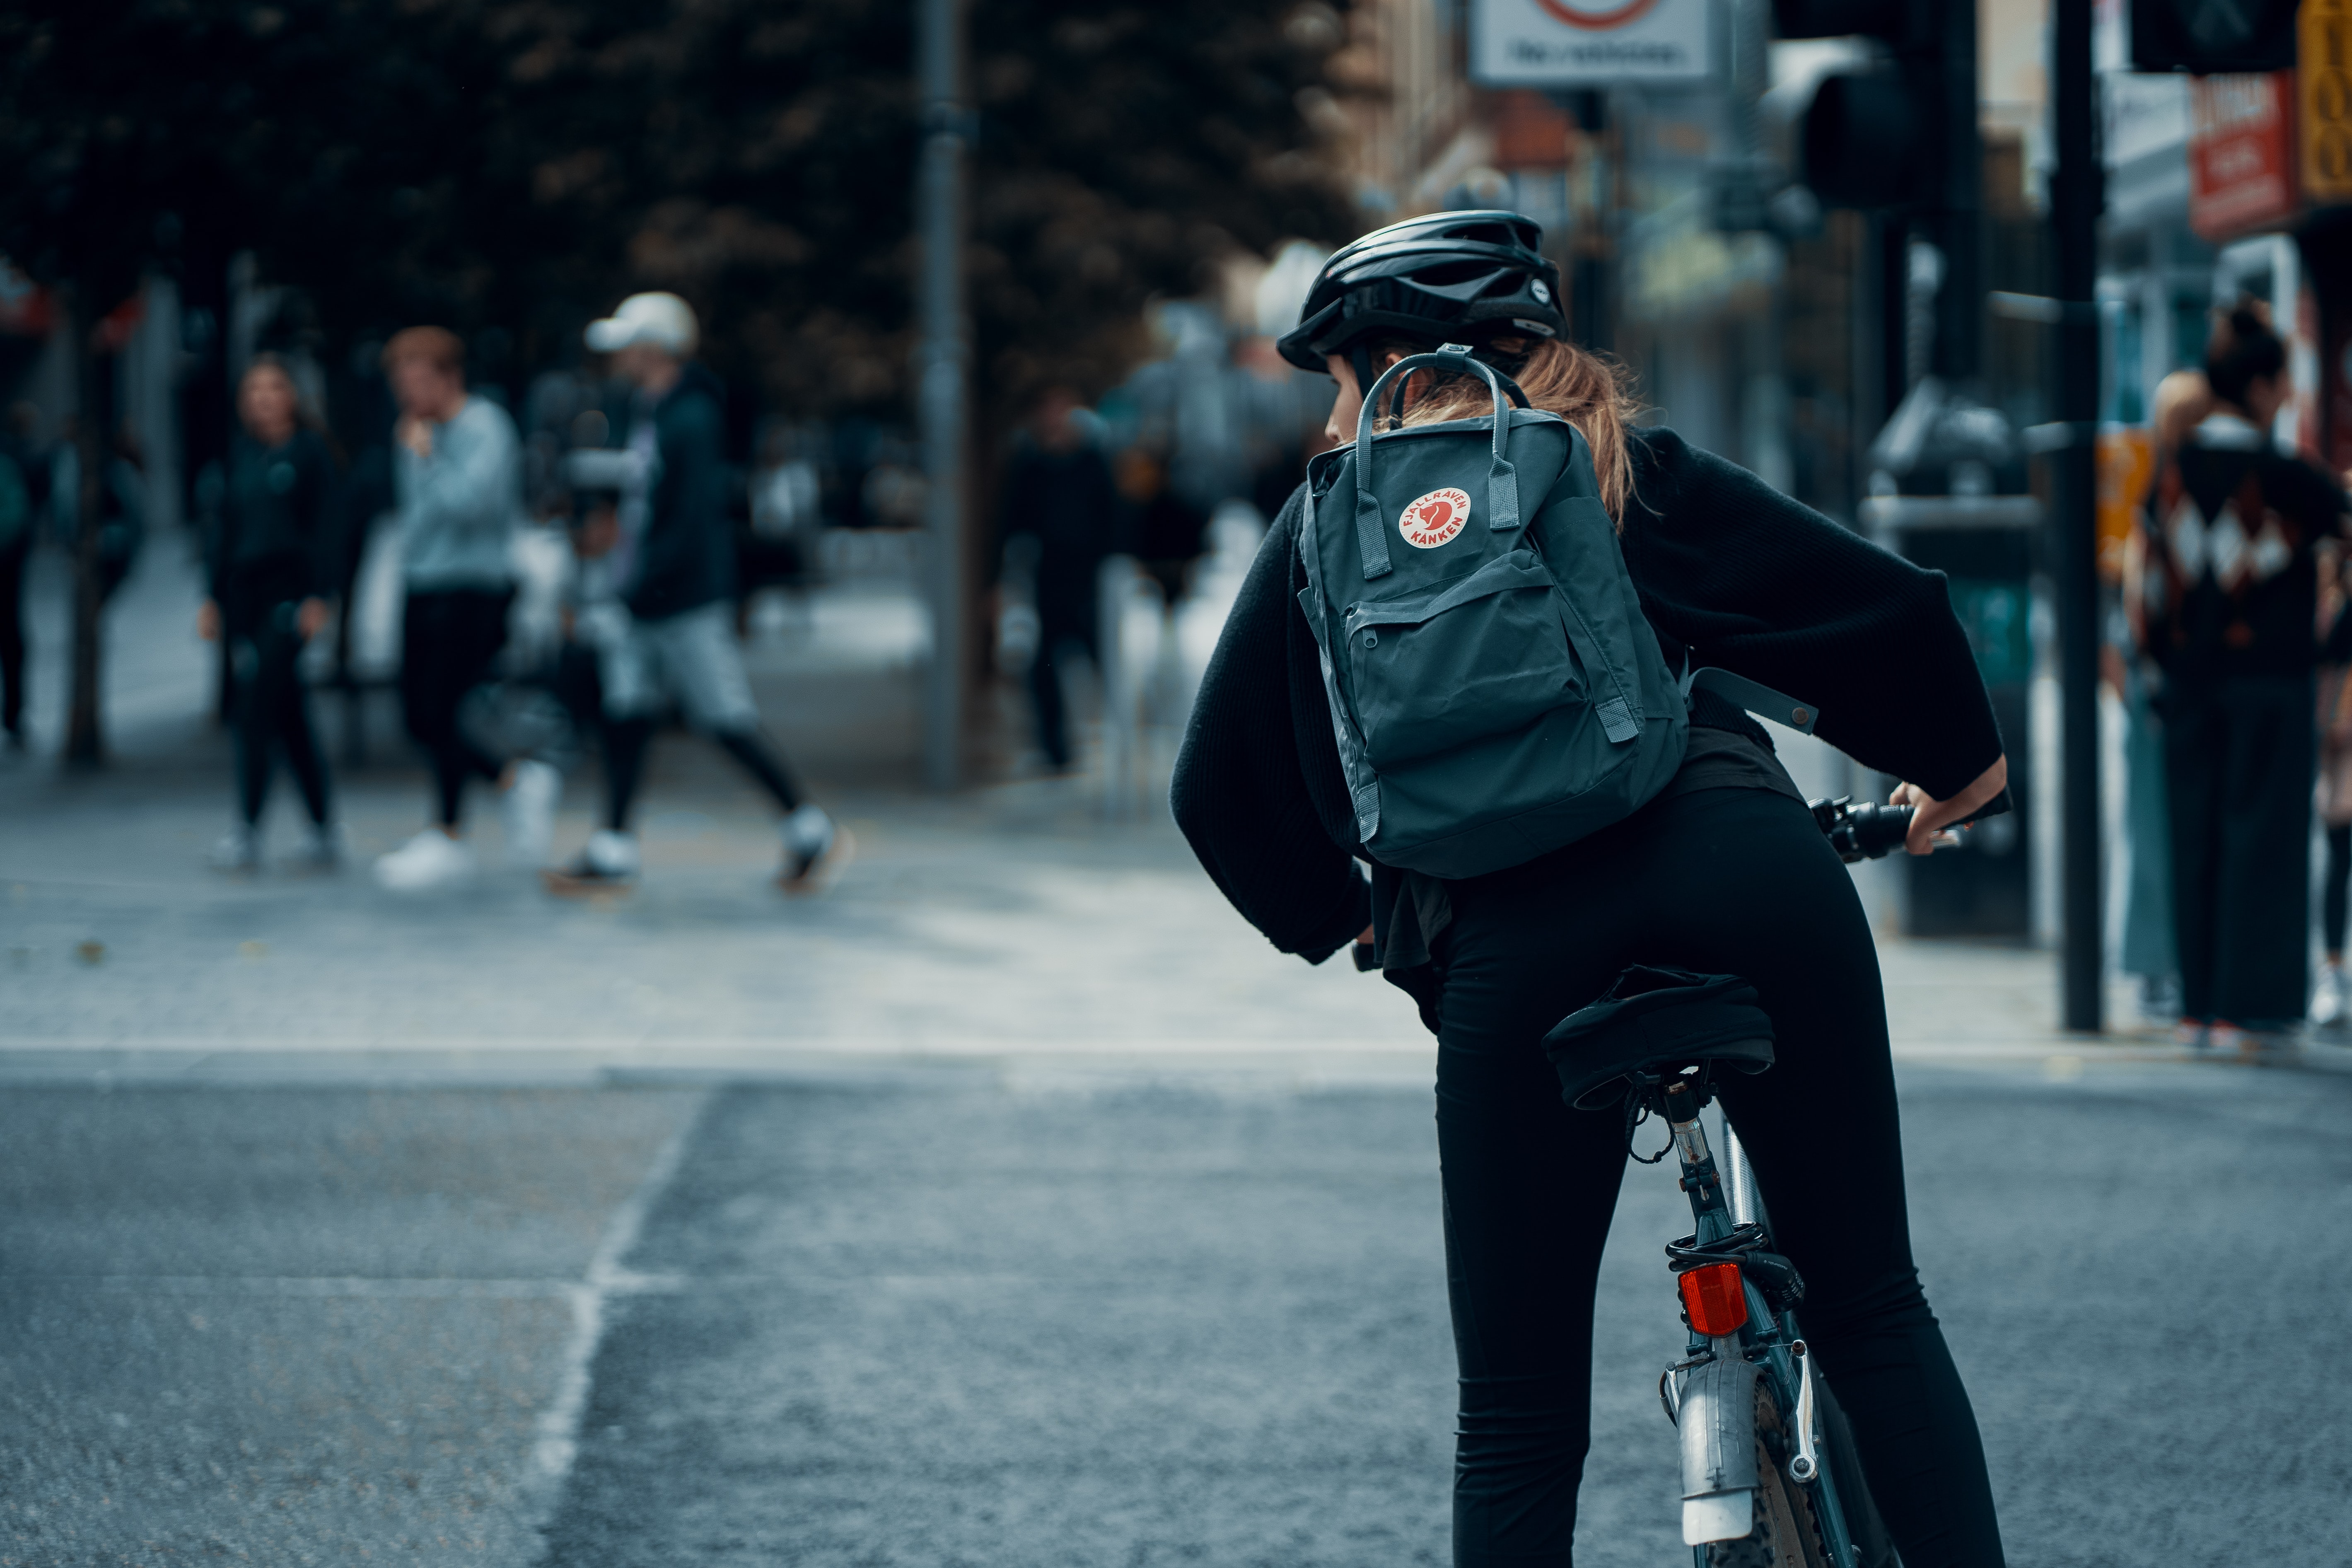 Bike Essentials to Help You Level-Up Your Commute, Errands and More